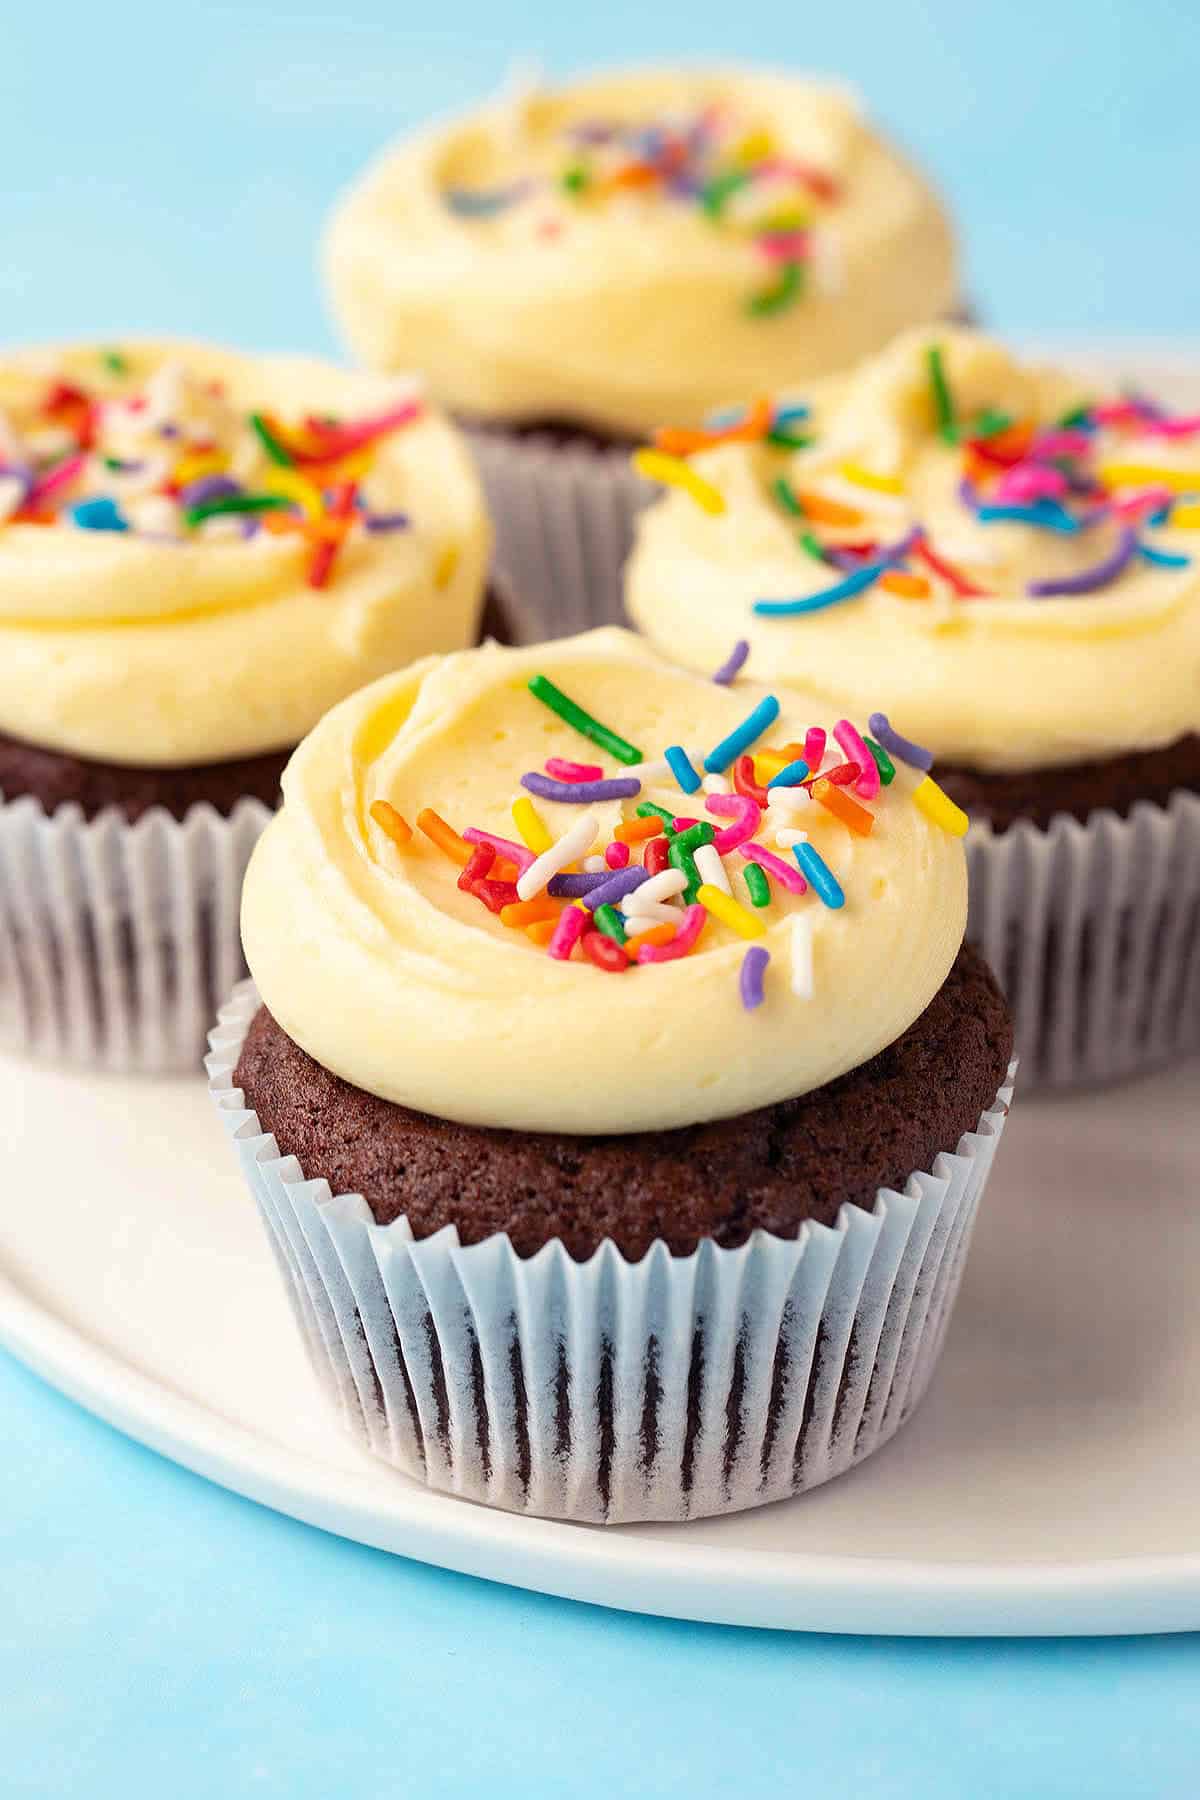 A plate of chocolate cupcakes with yellow frosting and sprinkles on a white plate.